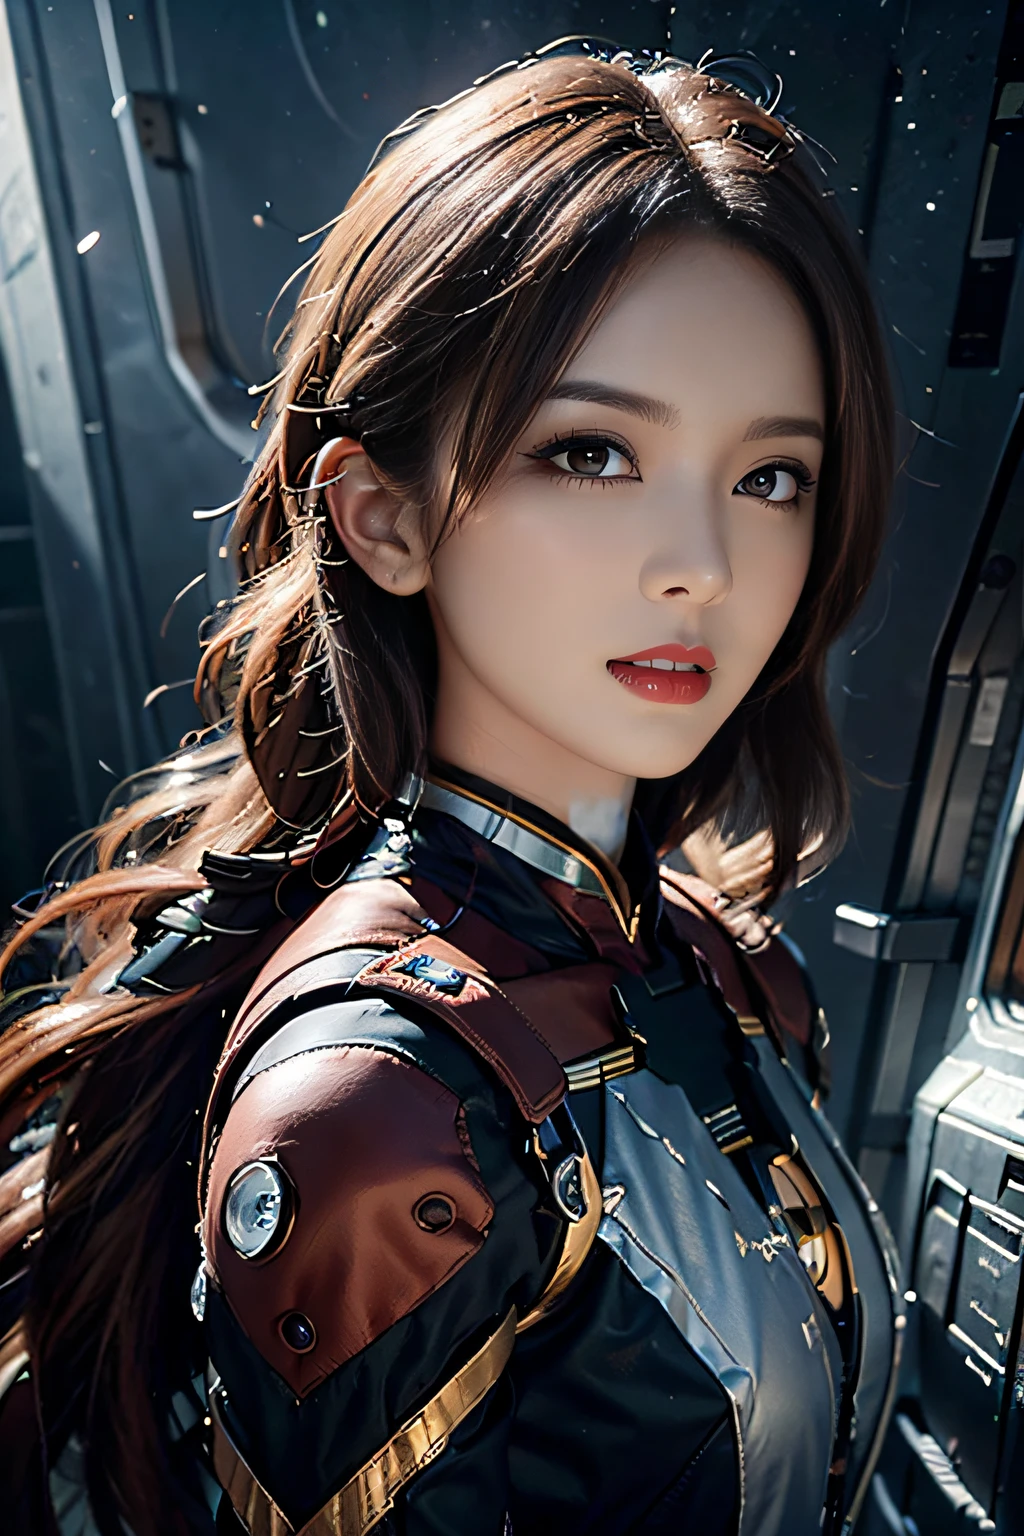 RAW, Masterpiece, Super Fine Photo,, Best Quality, Ultra High Resolution, Photorealistic Photorealism, Sunlight, Full Body Portrait, Amazing Beauty,,Dynamic Pose,Delicate Face,Vibrant Eyes,(From the side), She Wears Futuristic Iron Man Mech, Red and Gold Color Scheme, Very Detailed Space Background, Detailed Face, Detailed Complex Space Background, Messy, Gorgeous, Milky White, Highly Detailed Skin, Realistic Skin Details, Visible Pores, Sharp Focus, Volumetric Fog, 8K UHD, DSLR camera, high quality, film grain, fair skin, photorealism, lomography, starship in space, seen from below, translucent